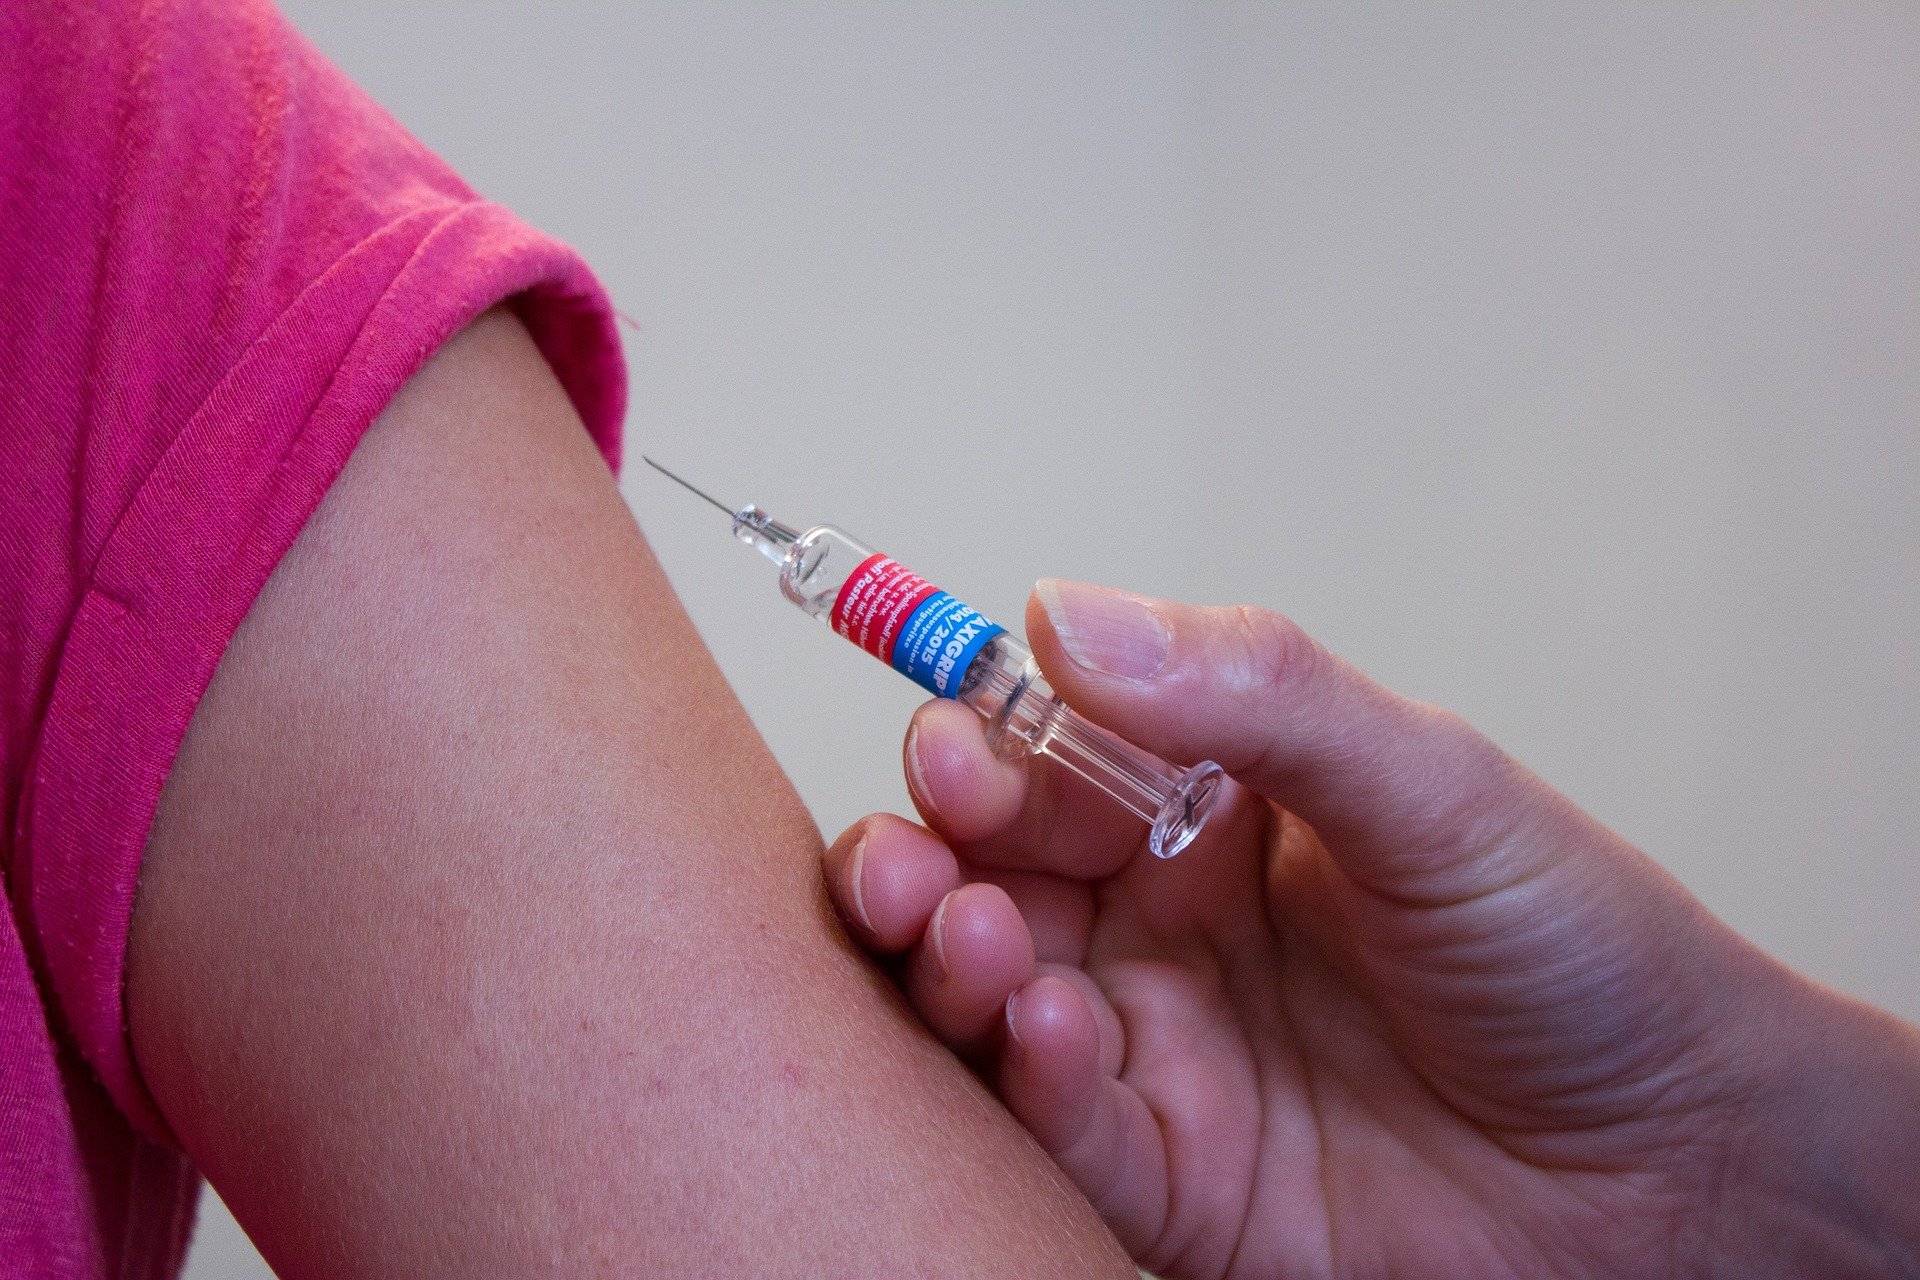 COVID vaccines for under-16s: why competent children in the UK can legally decide for themselves